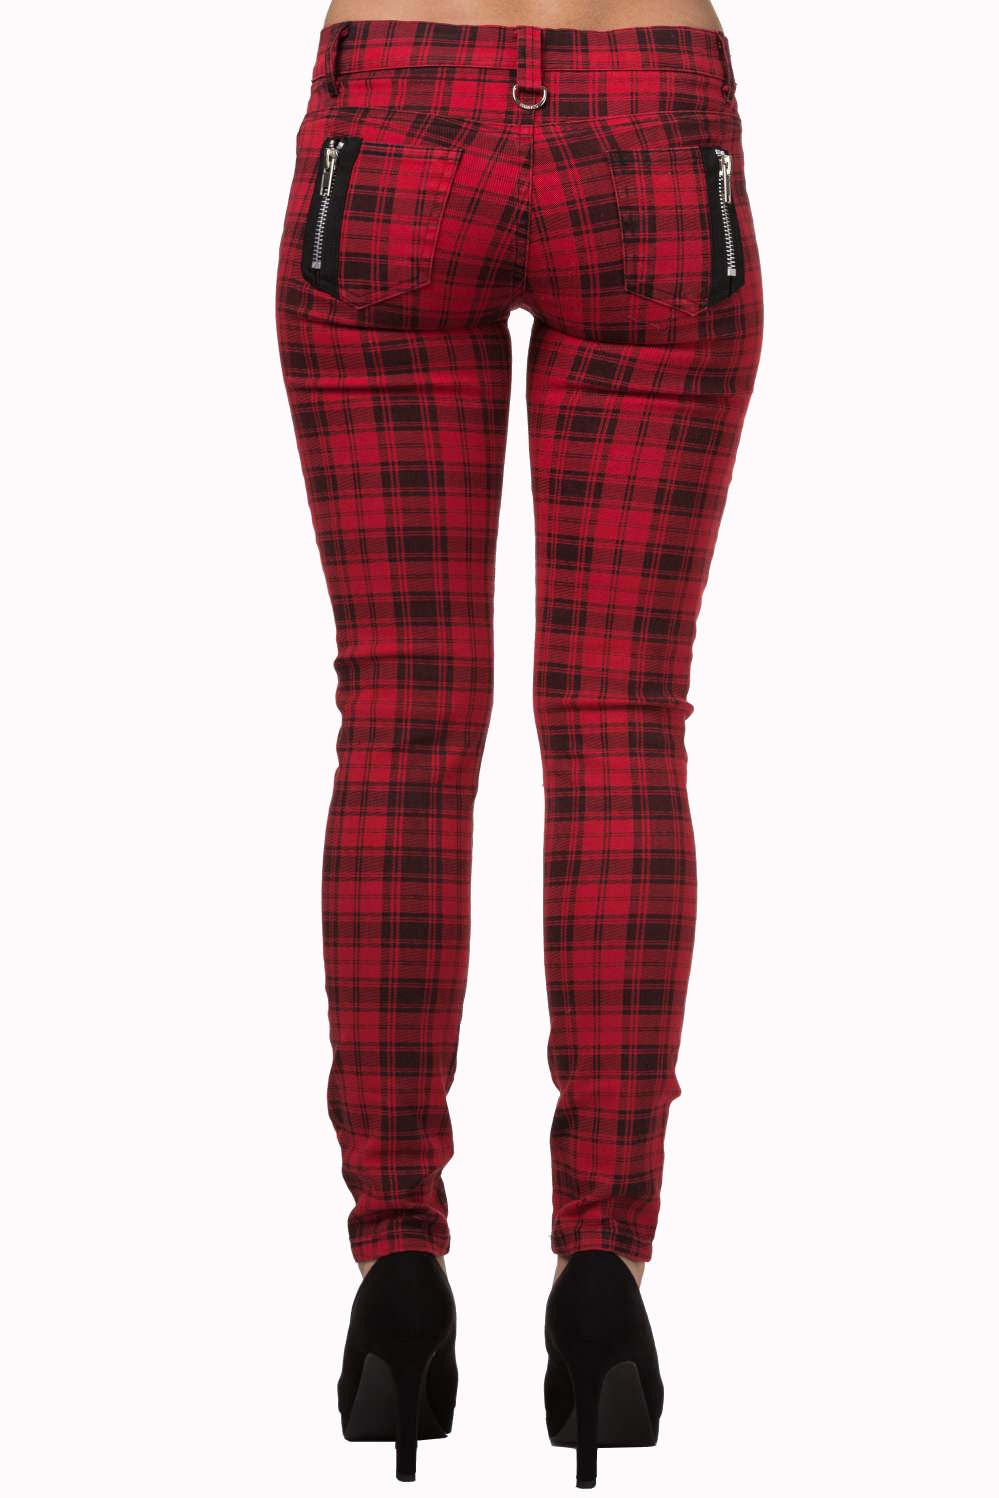 Red tartan check trousers low rise with rips. 